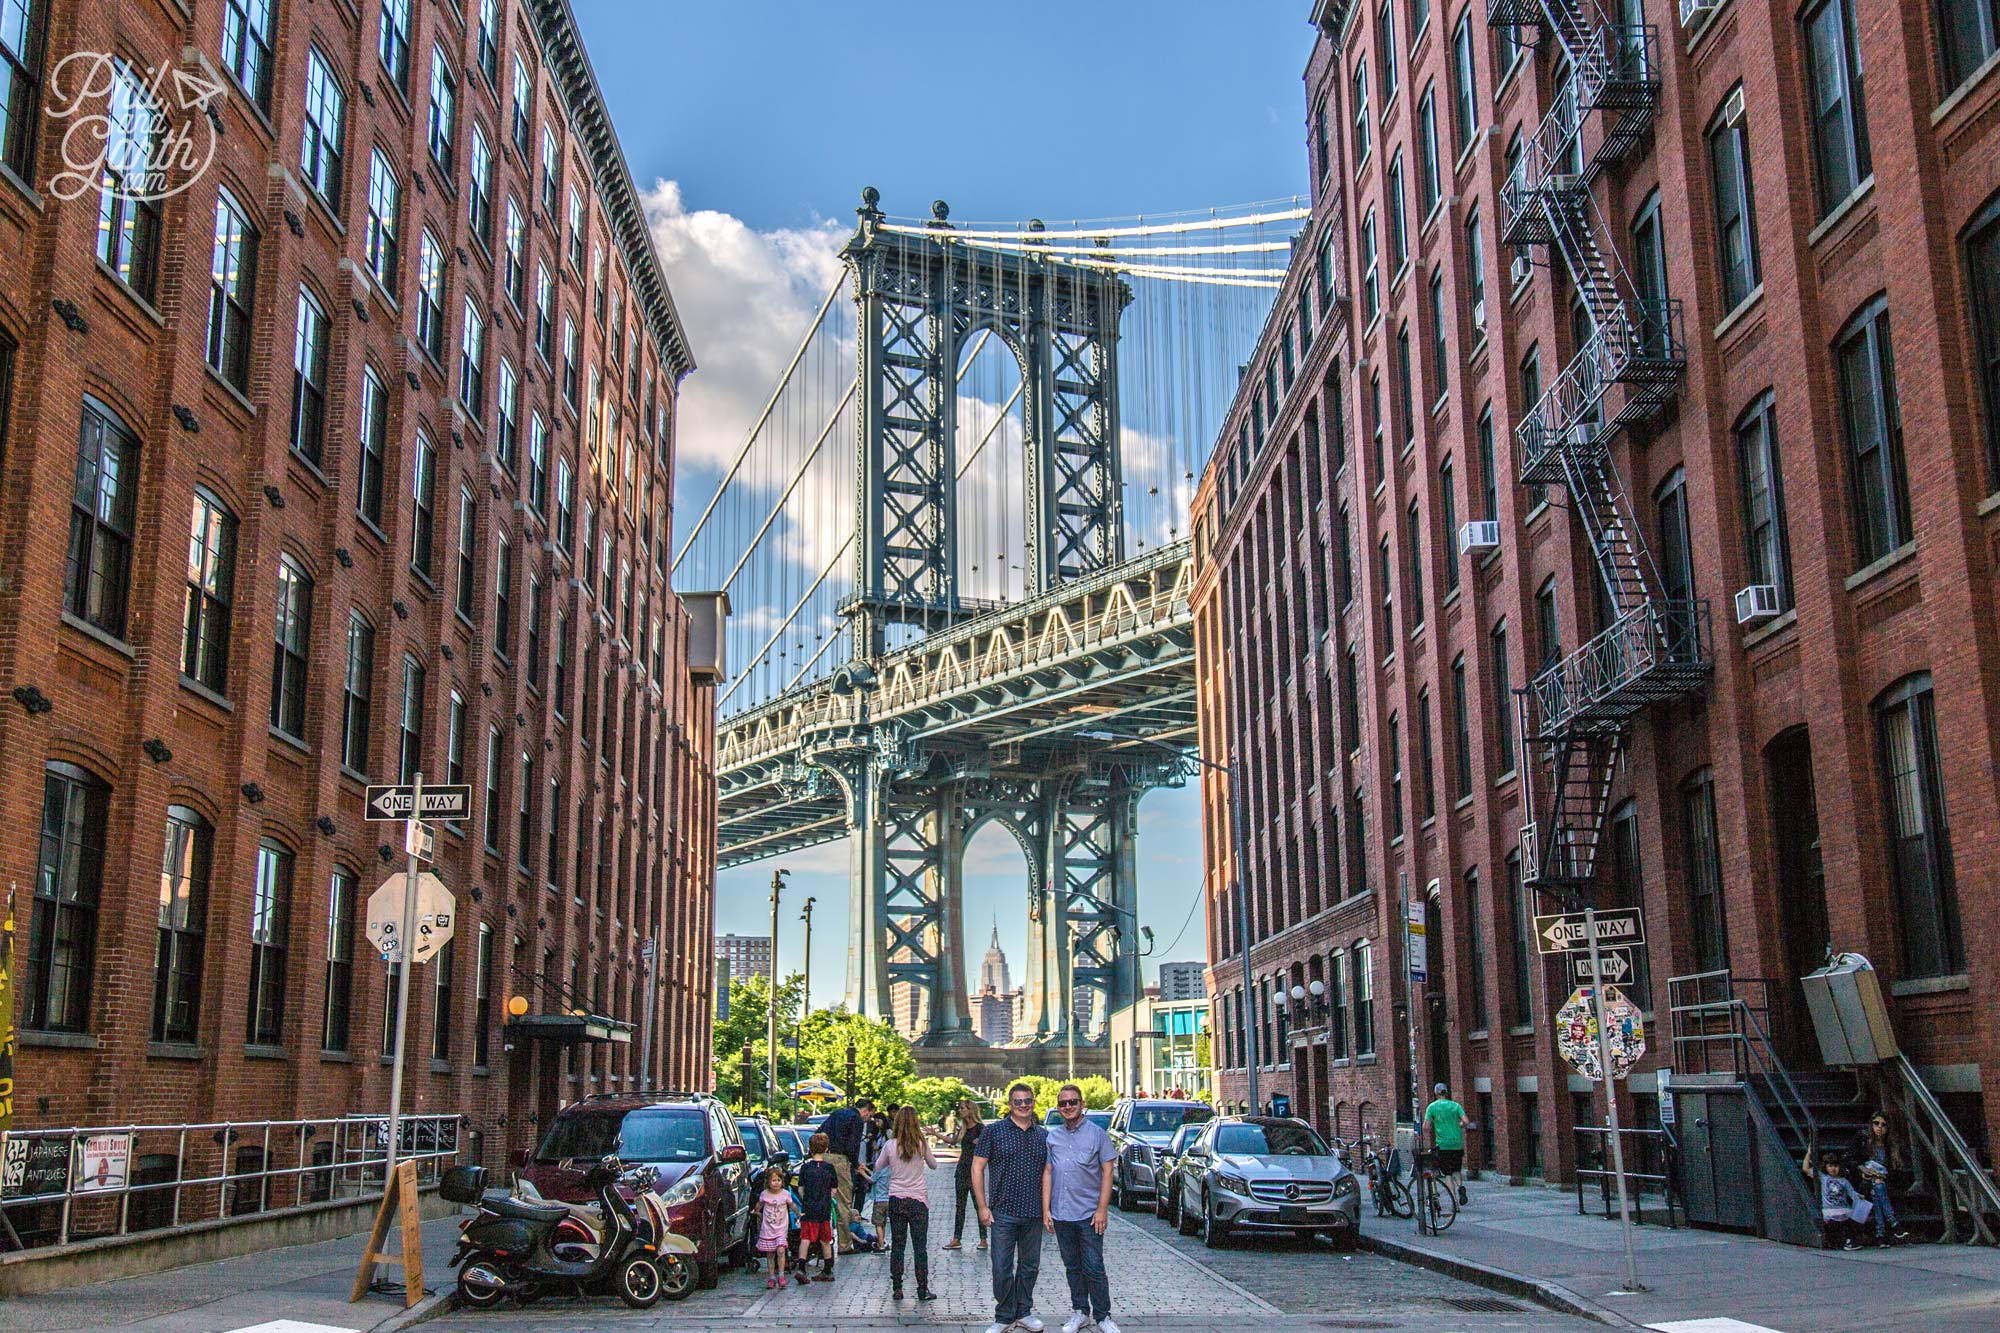 The Manhattan Bridge beautifully frames the Empire State Building - see it?